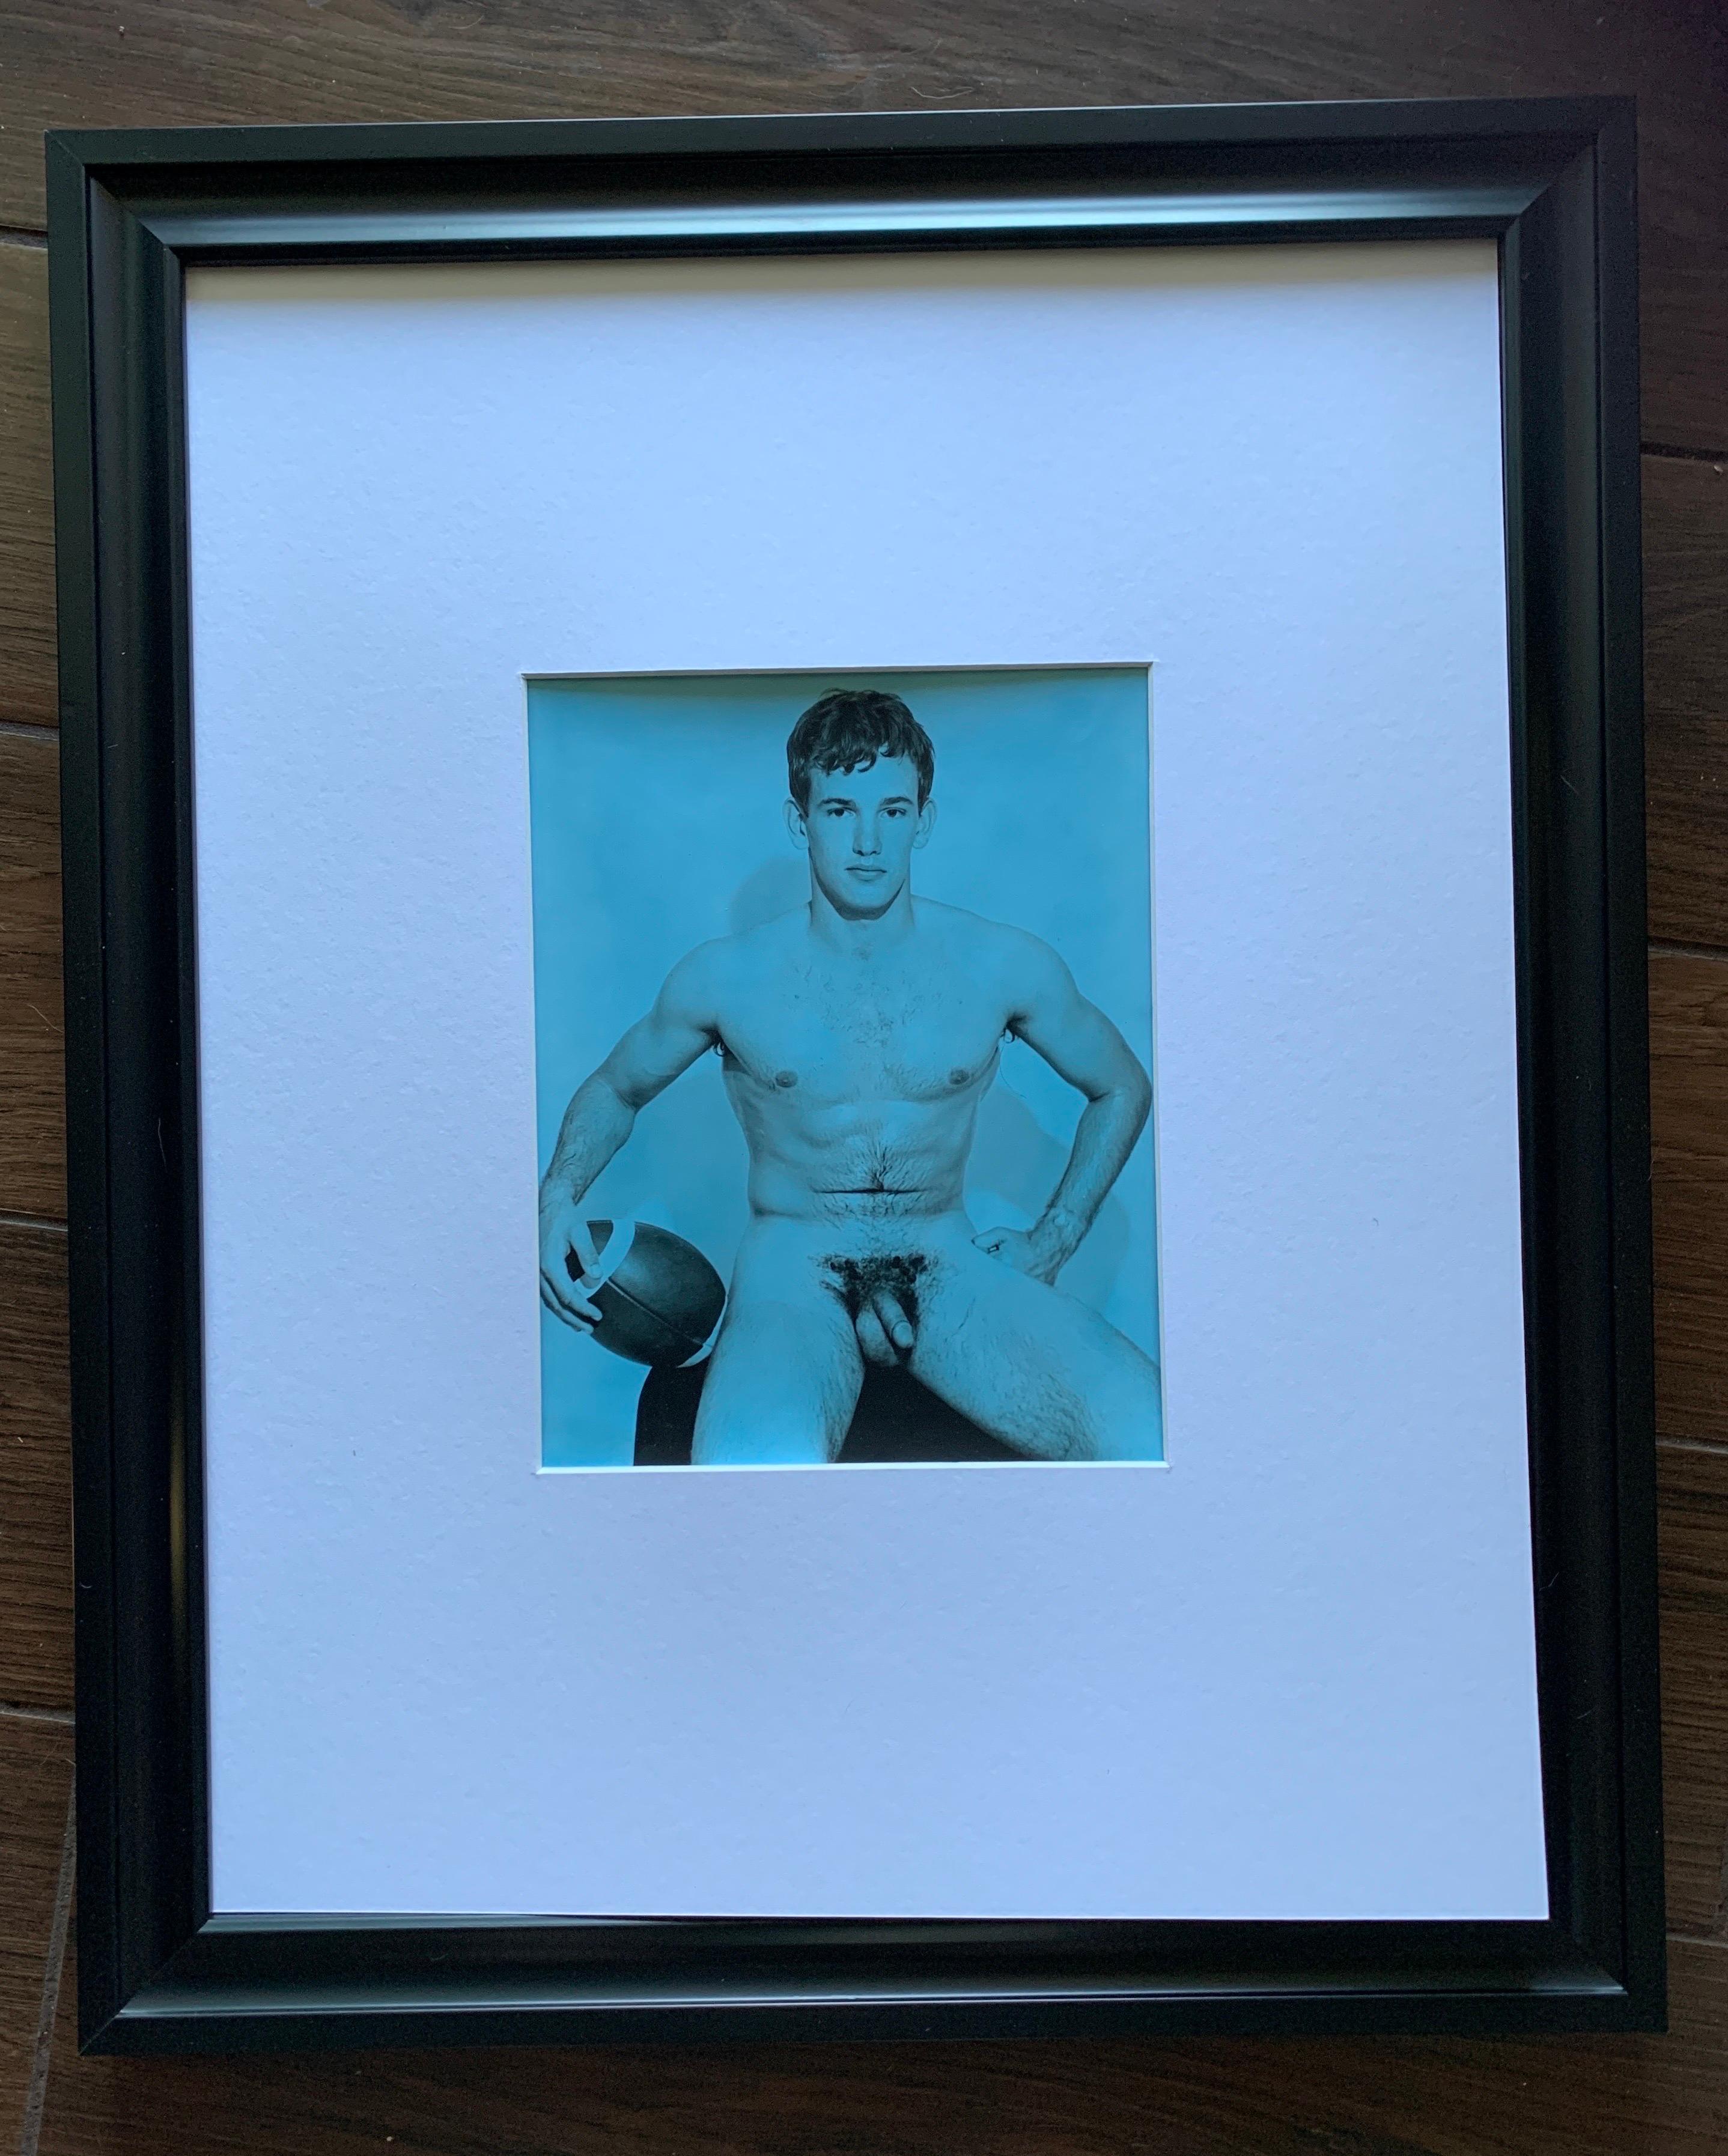 We had the pleasure of meeting Mr. Dave Martin at his San Francisco apartment in the early 2000s. We had been collecting original male physique photography for decades, and found out about Mr. Martin’s amazing work after a coffee table book came out